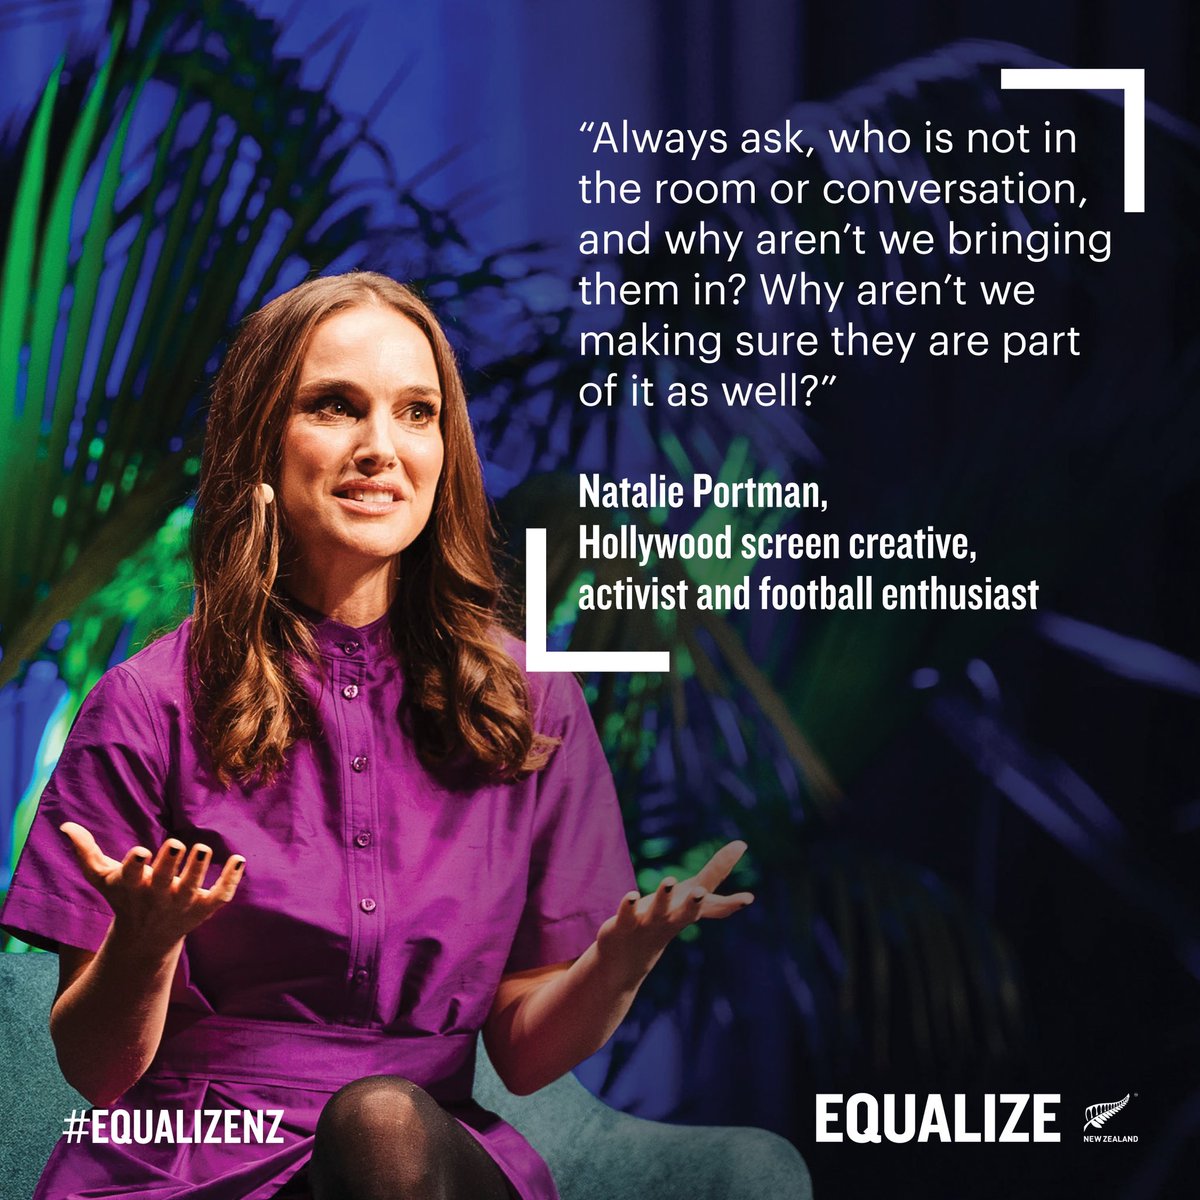 Catch up on our EQUALIZE series and watch key discussions championing women and girls in sports and society. From Auckland to Dunedin, we celebrated wāhine toa nationwide and beyond 🏆
 
👉 Watch the EQUALIZE series here: eyeson.nz/equalize
 
#EqualizeNZ #EyesOnNZ